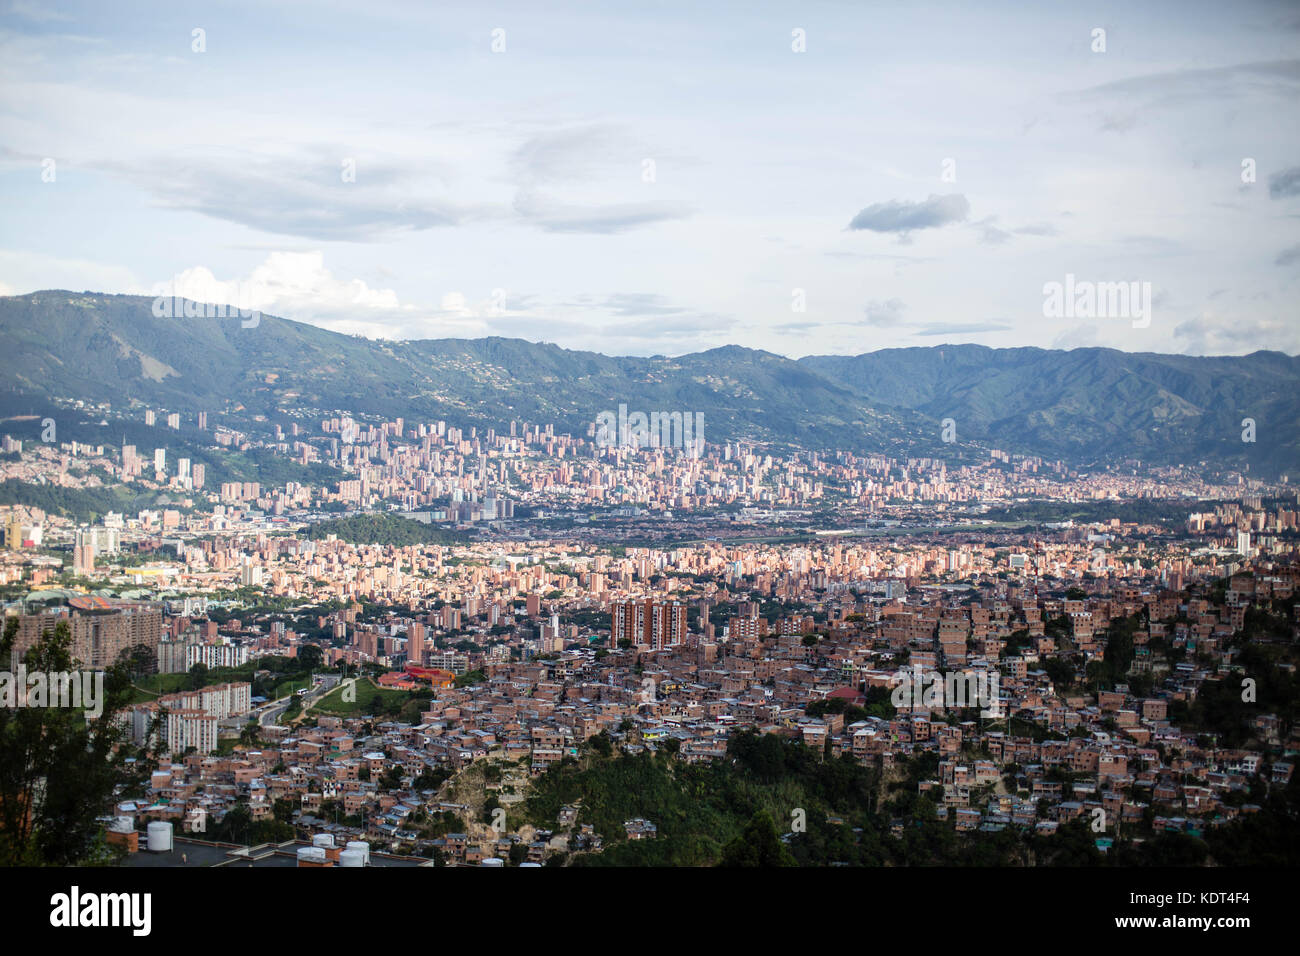 Medellin, Colombia's second largest city with 3 million people in the metropolitan area, has become synonymous with urban renewal. Stock Photo